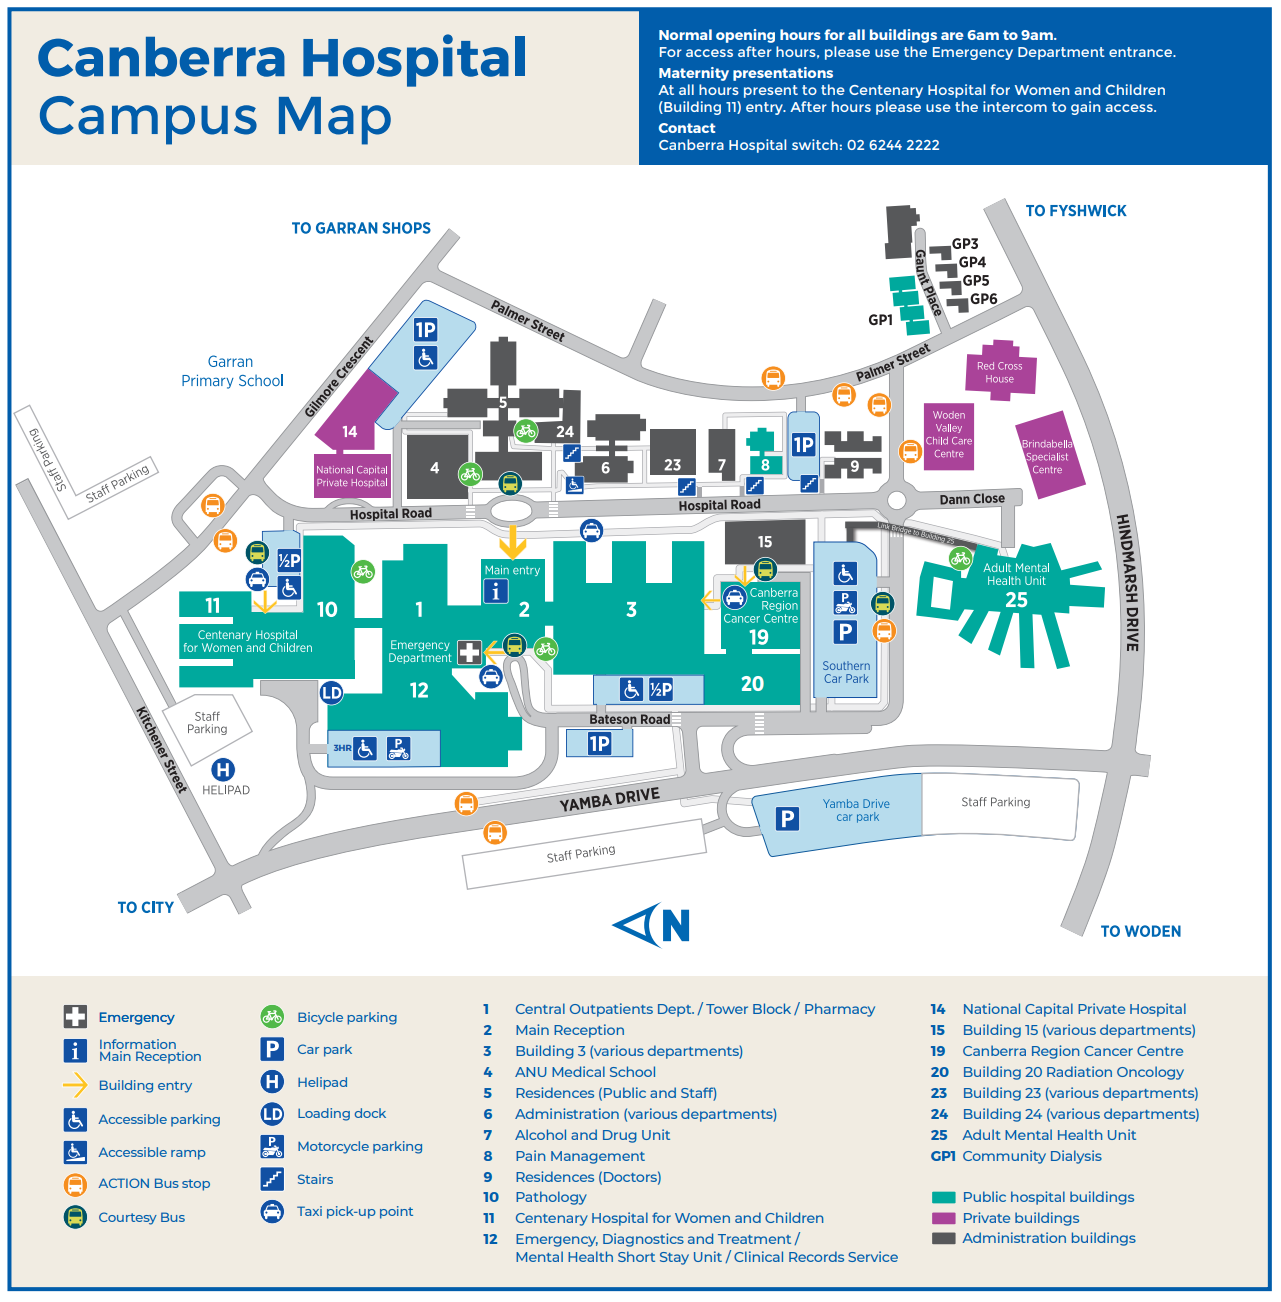 Canberra Hospital map using are features, see caption and text surrounding image